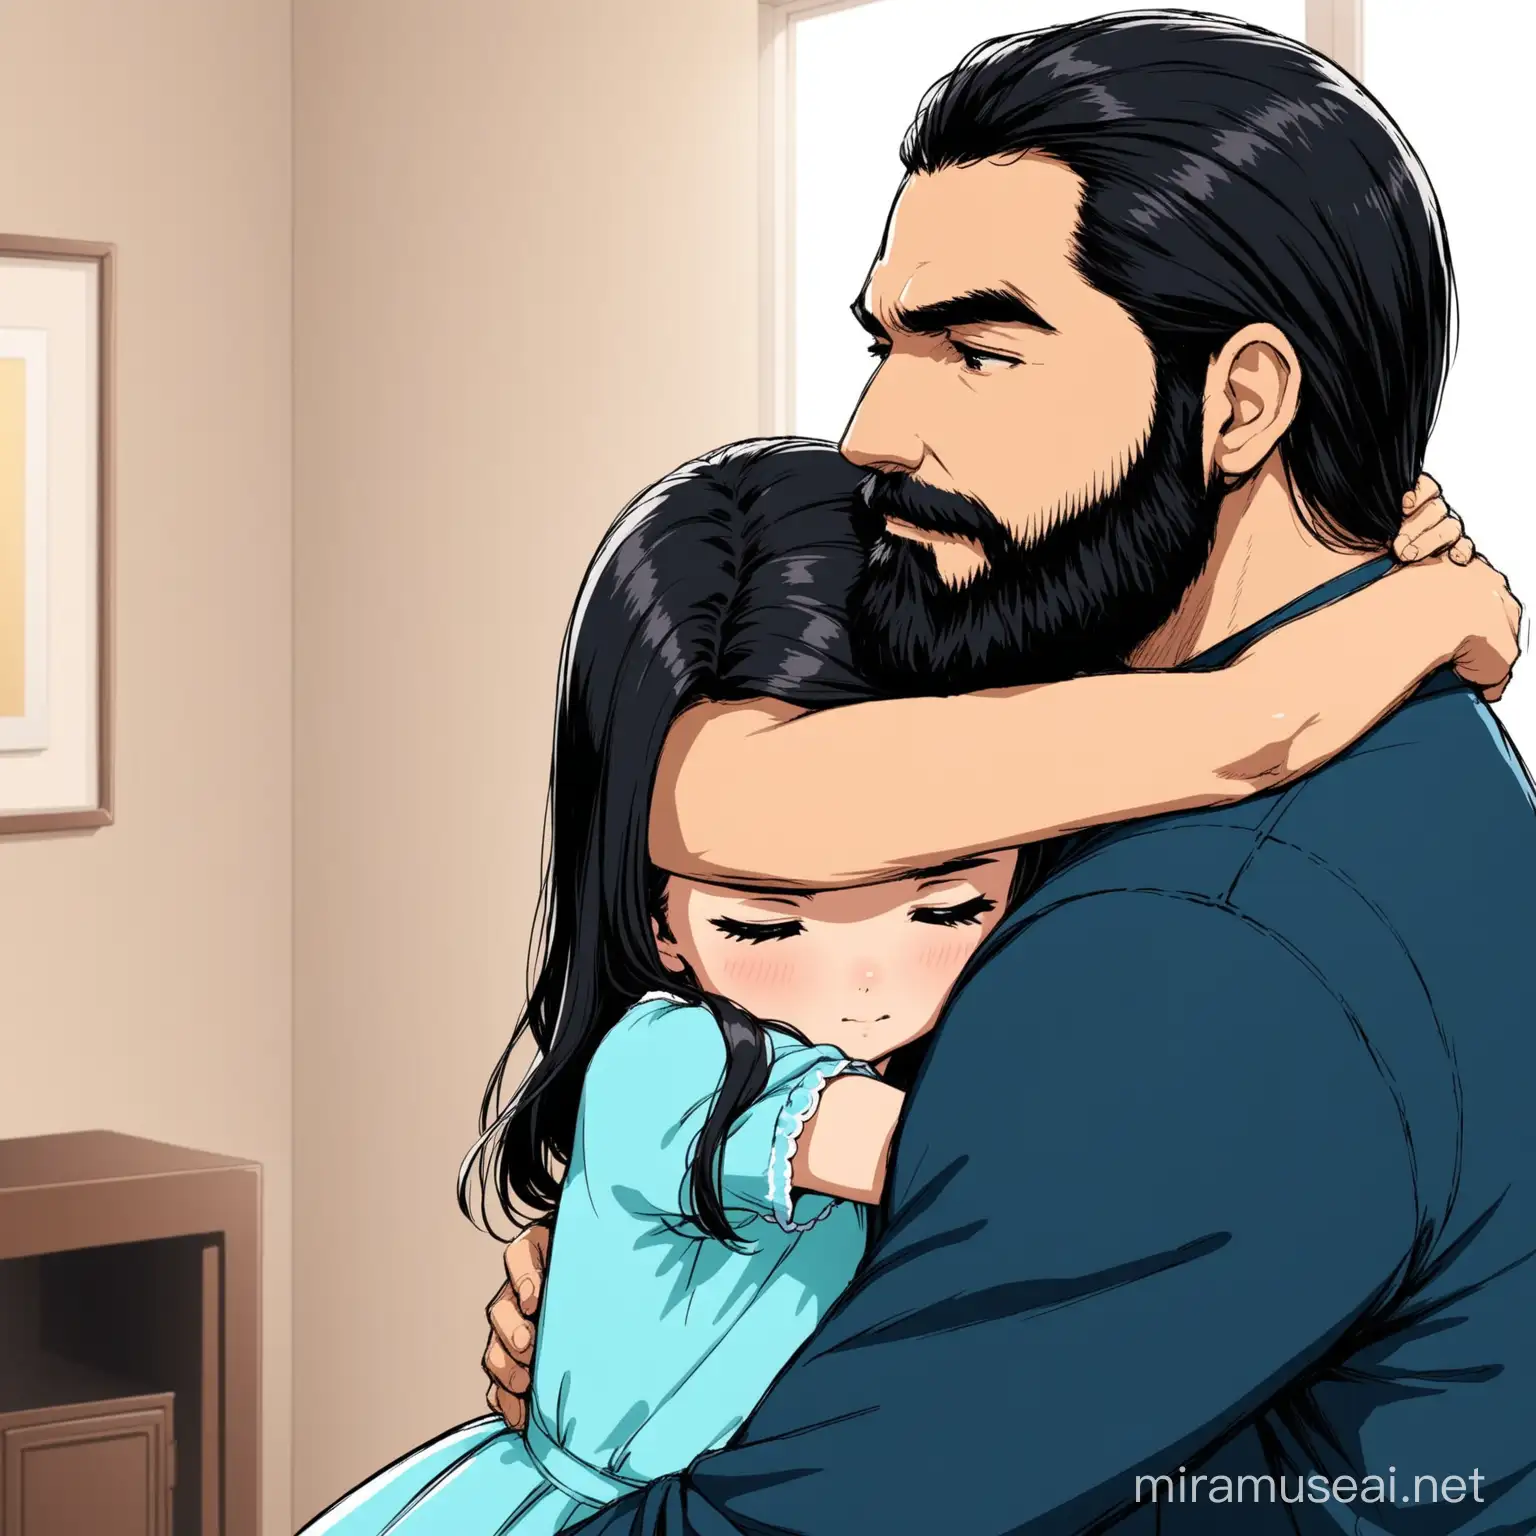 Affectionate Father Embracing Daughter in Cozy Living Room Setting